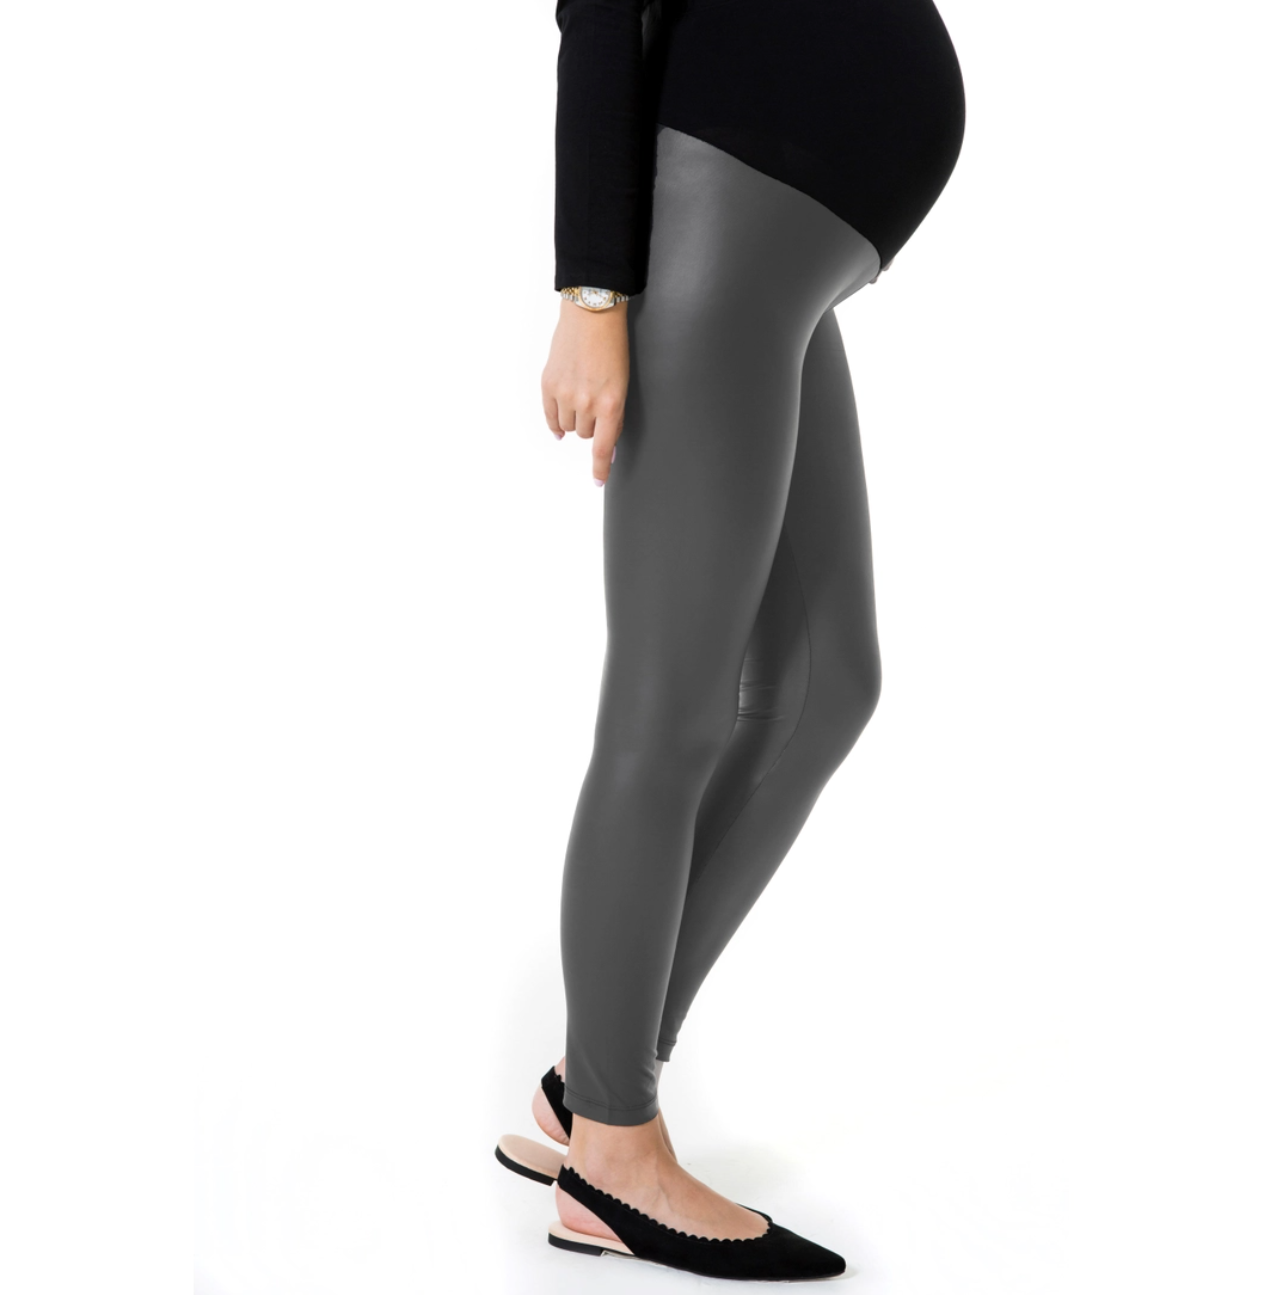 Anthracite Faux Leather Maternity Leggings – Mickey Roo Maternity